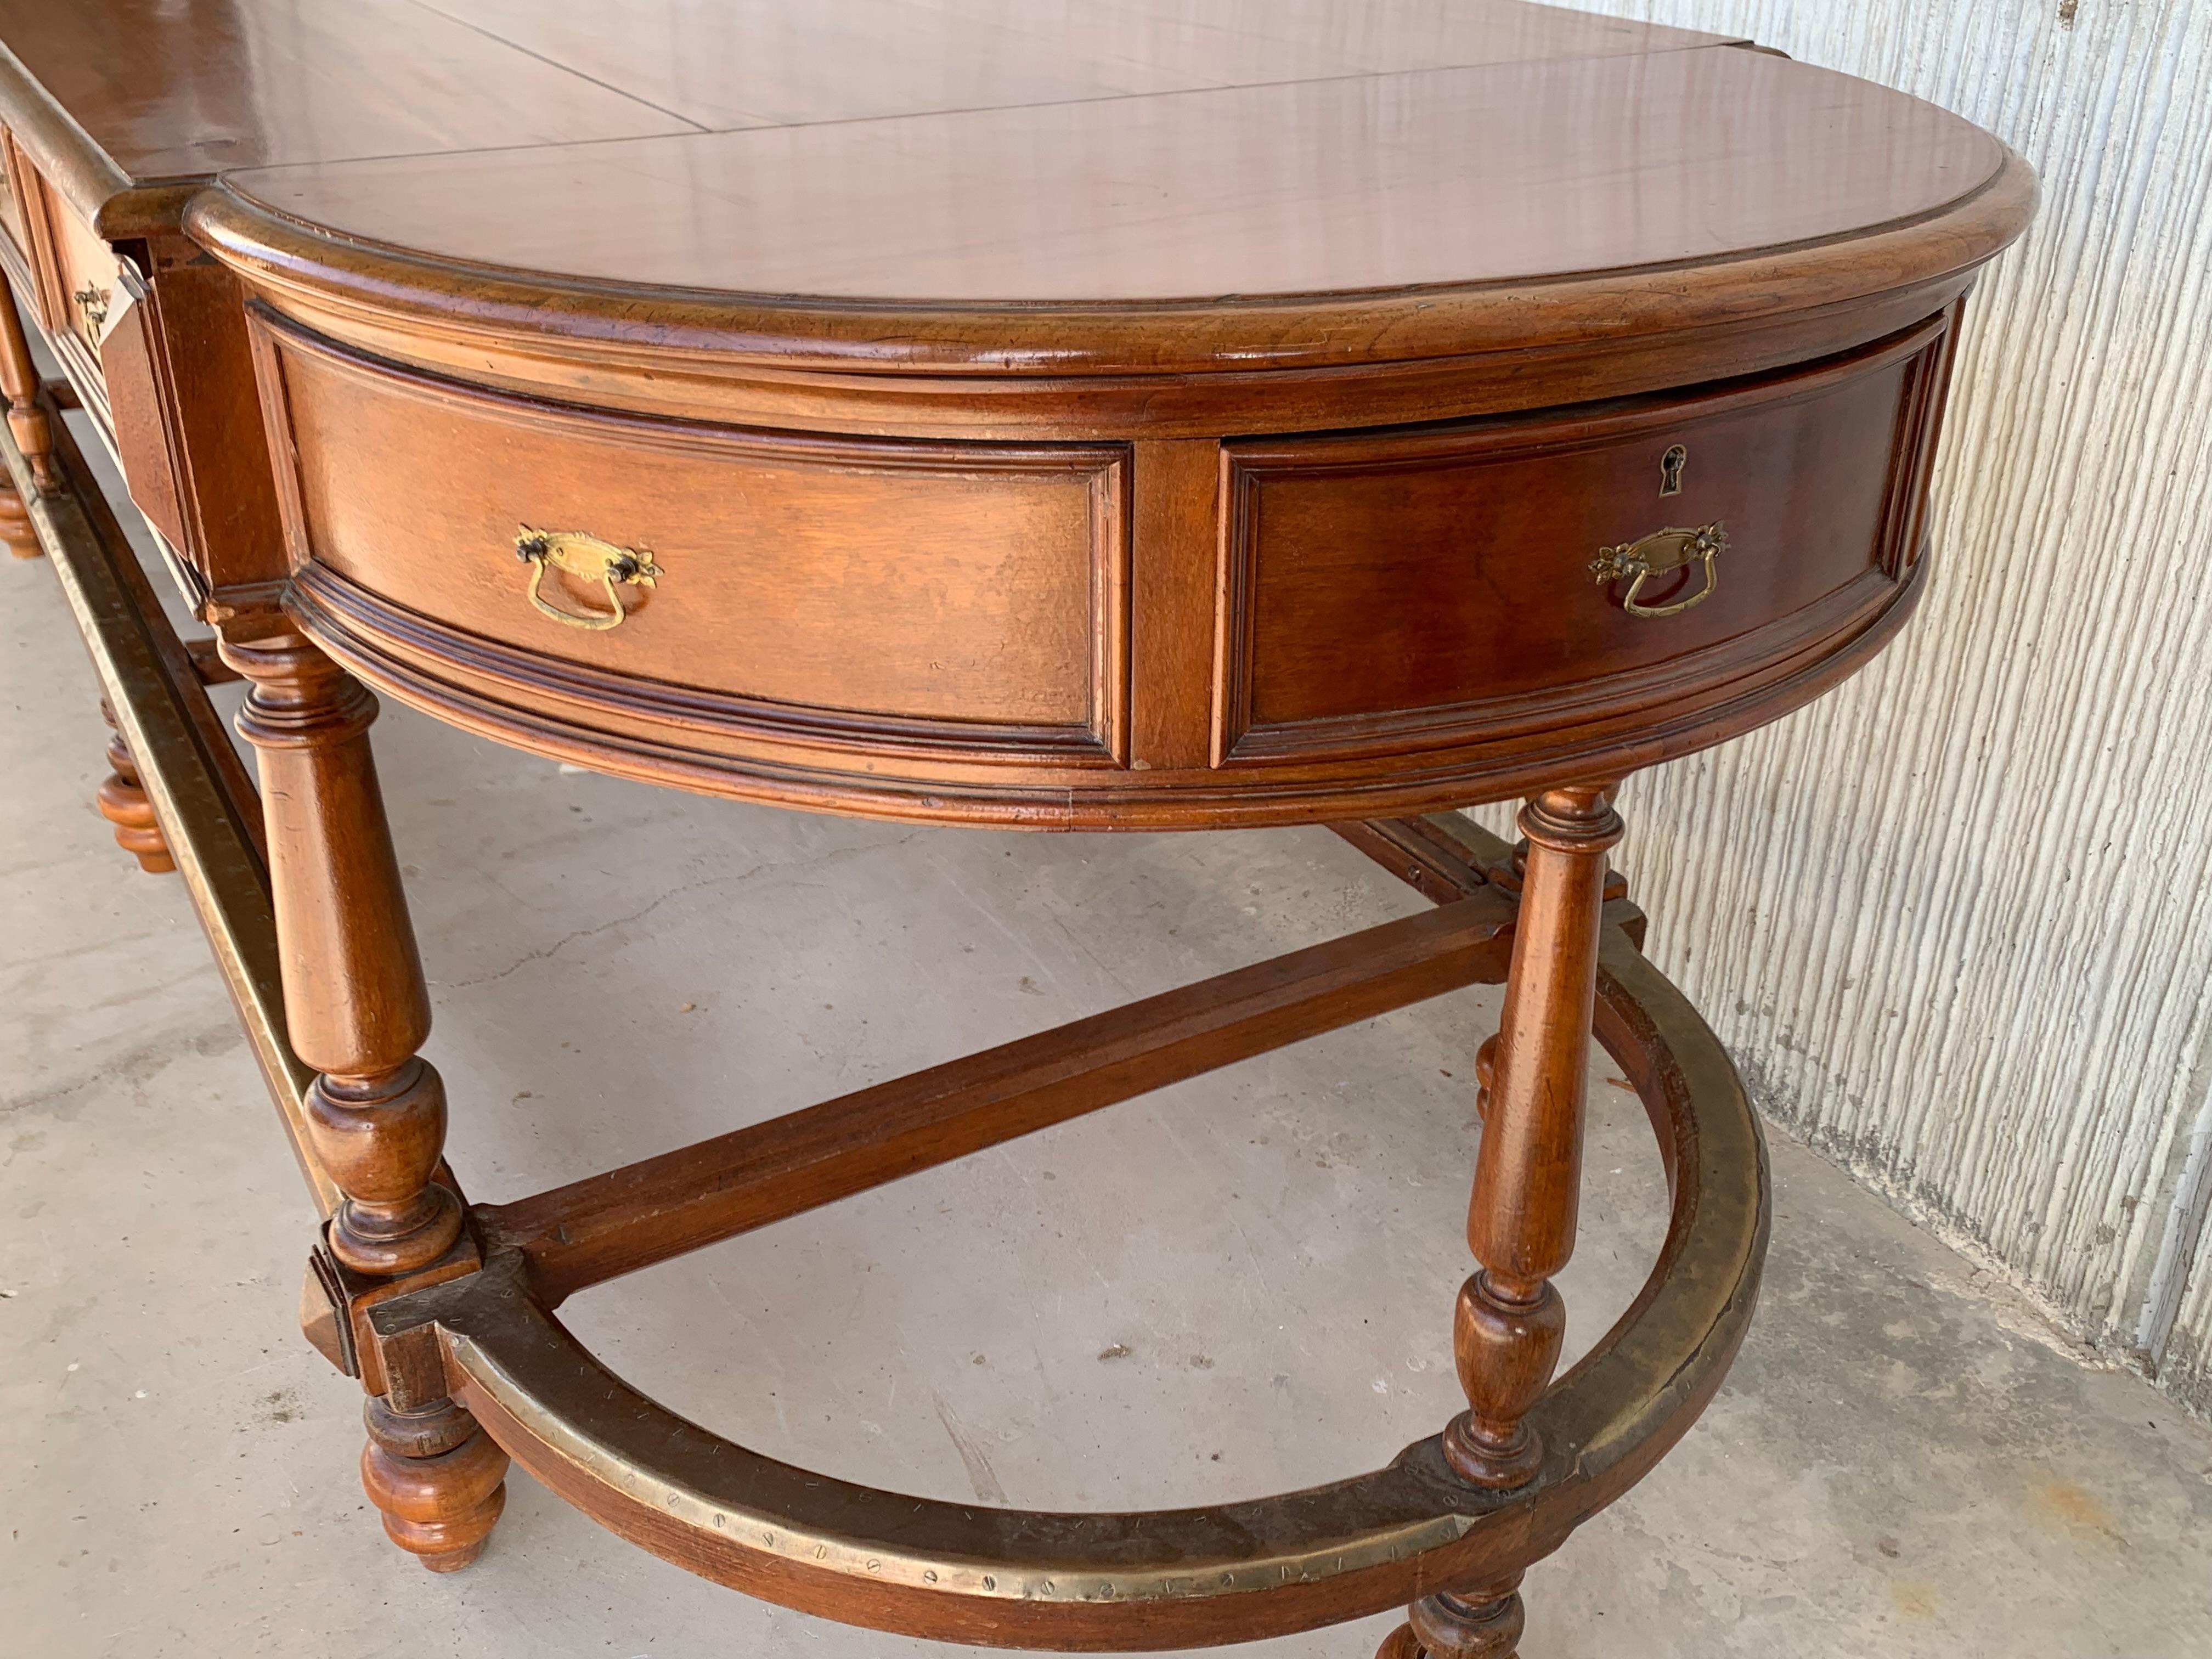 Wood 12 Foot Oval Center Table with Drawers in Both Sides, 20th Century For Sale